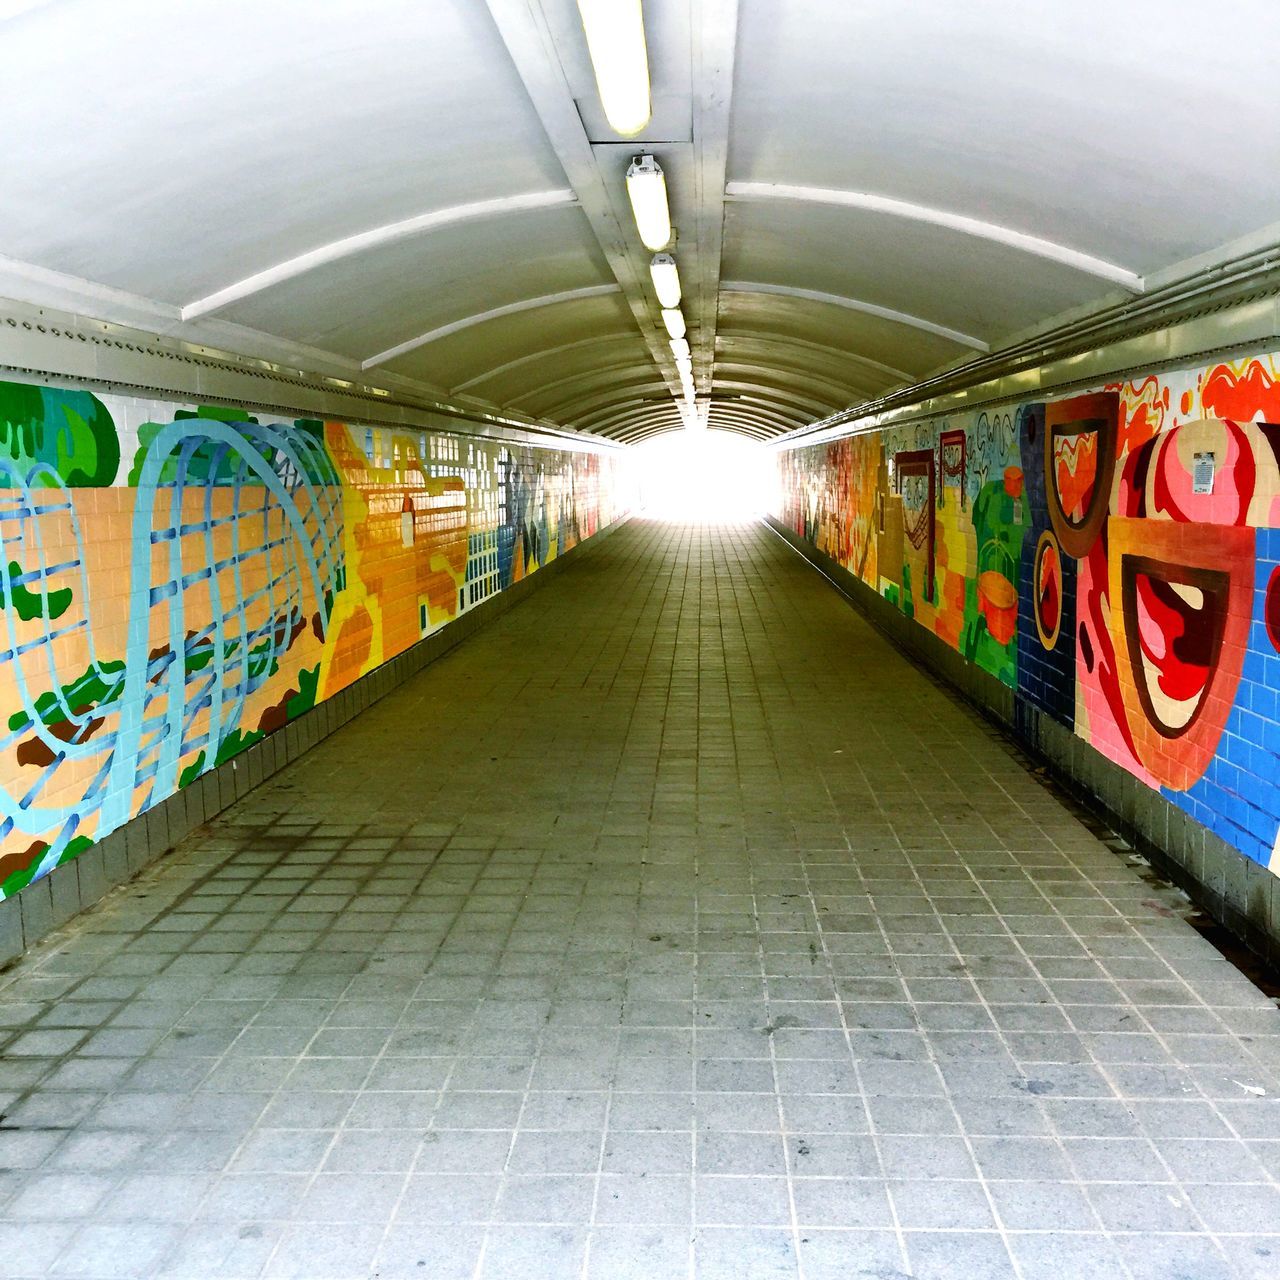 graffiti, indoors, art, ceiling, wall - building feature, creativity, art and craft, multi colored, the way forward, architecture, built structure, diminishing perspective, street art, wall, text, tunnel, illuminated, vanishing point, empty, subway